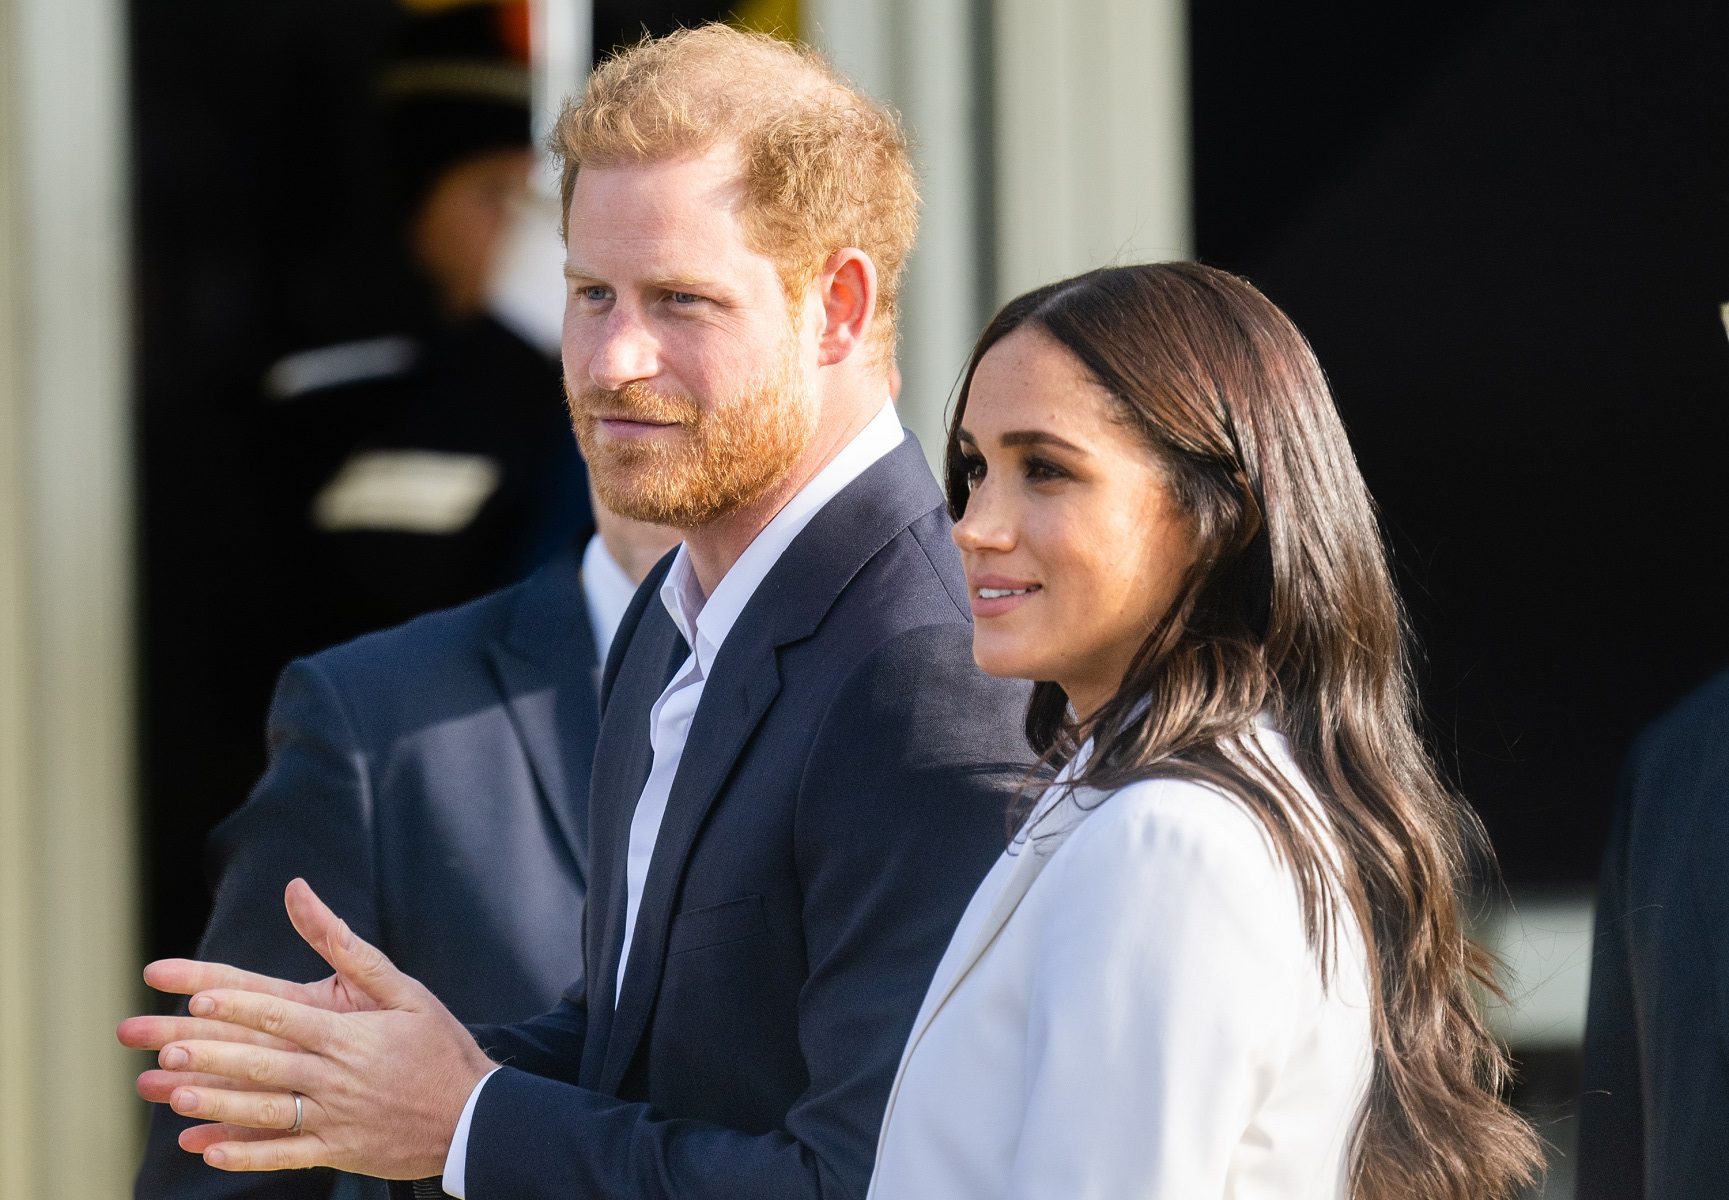 Prince Harry and Meghan Markle, who are house hunting outside Montecito now, attend Invictus Games reception in The Hauge, Netherlands